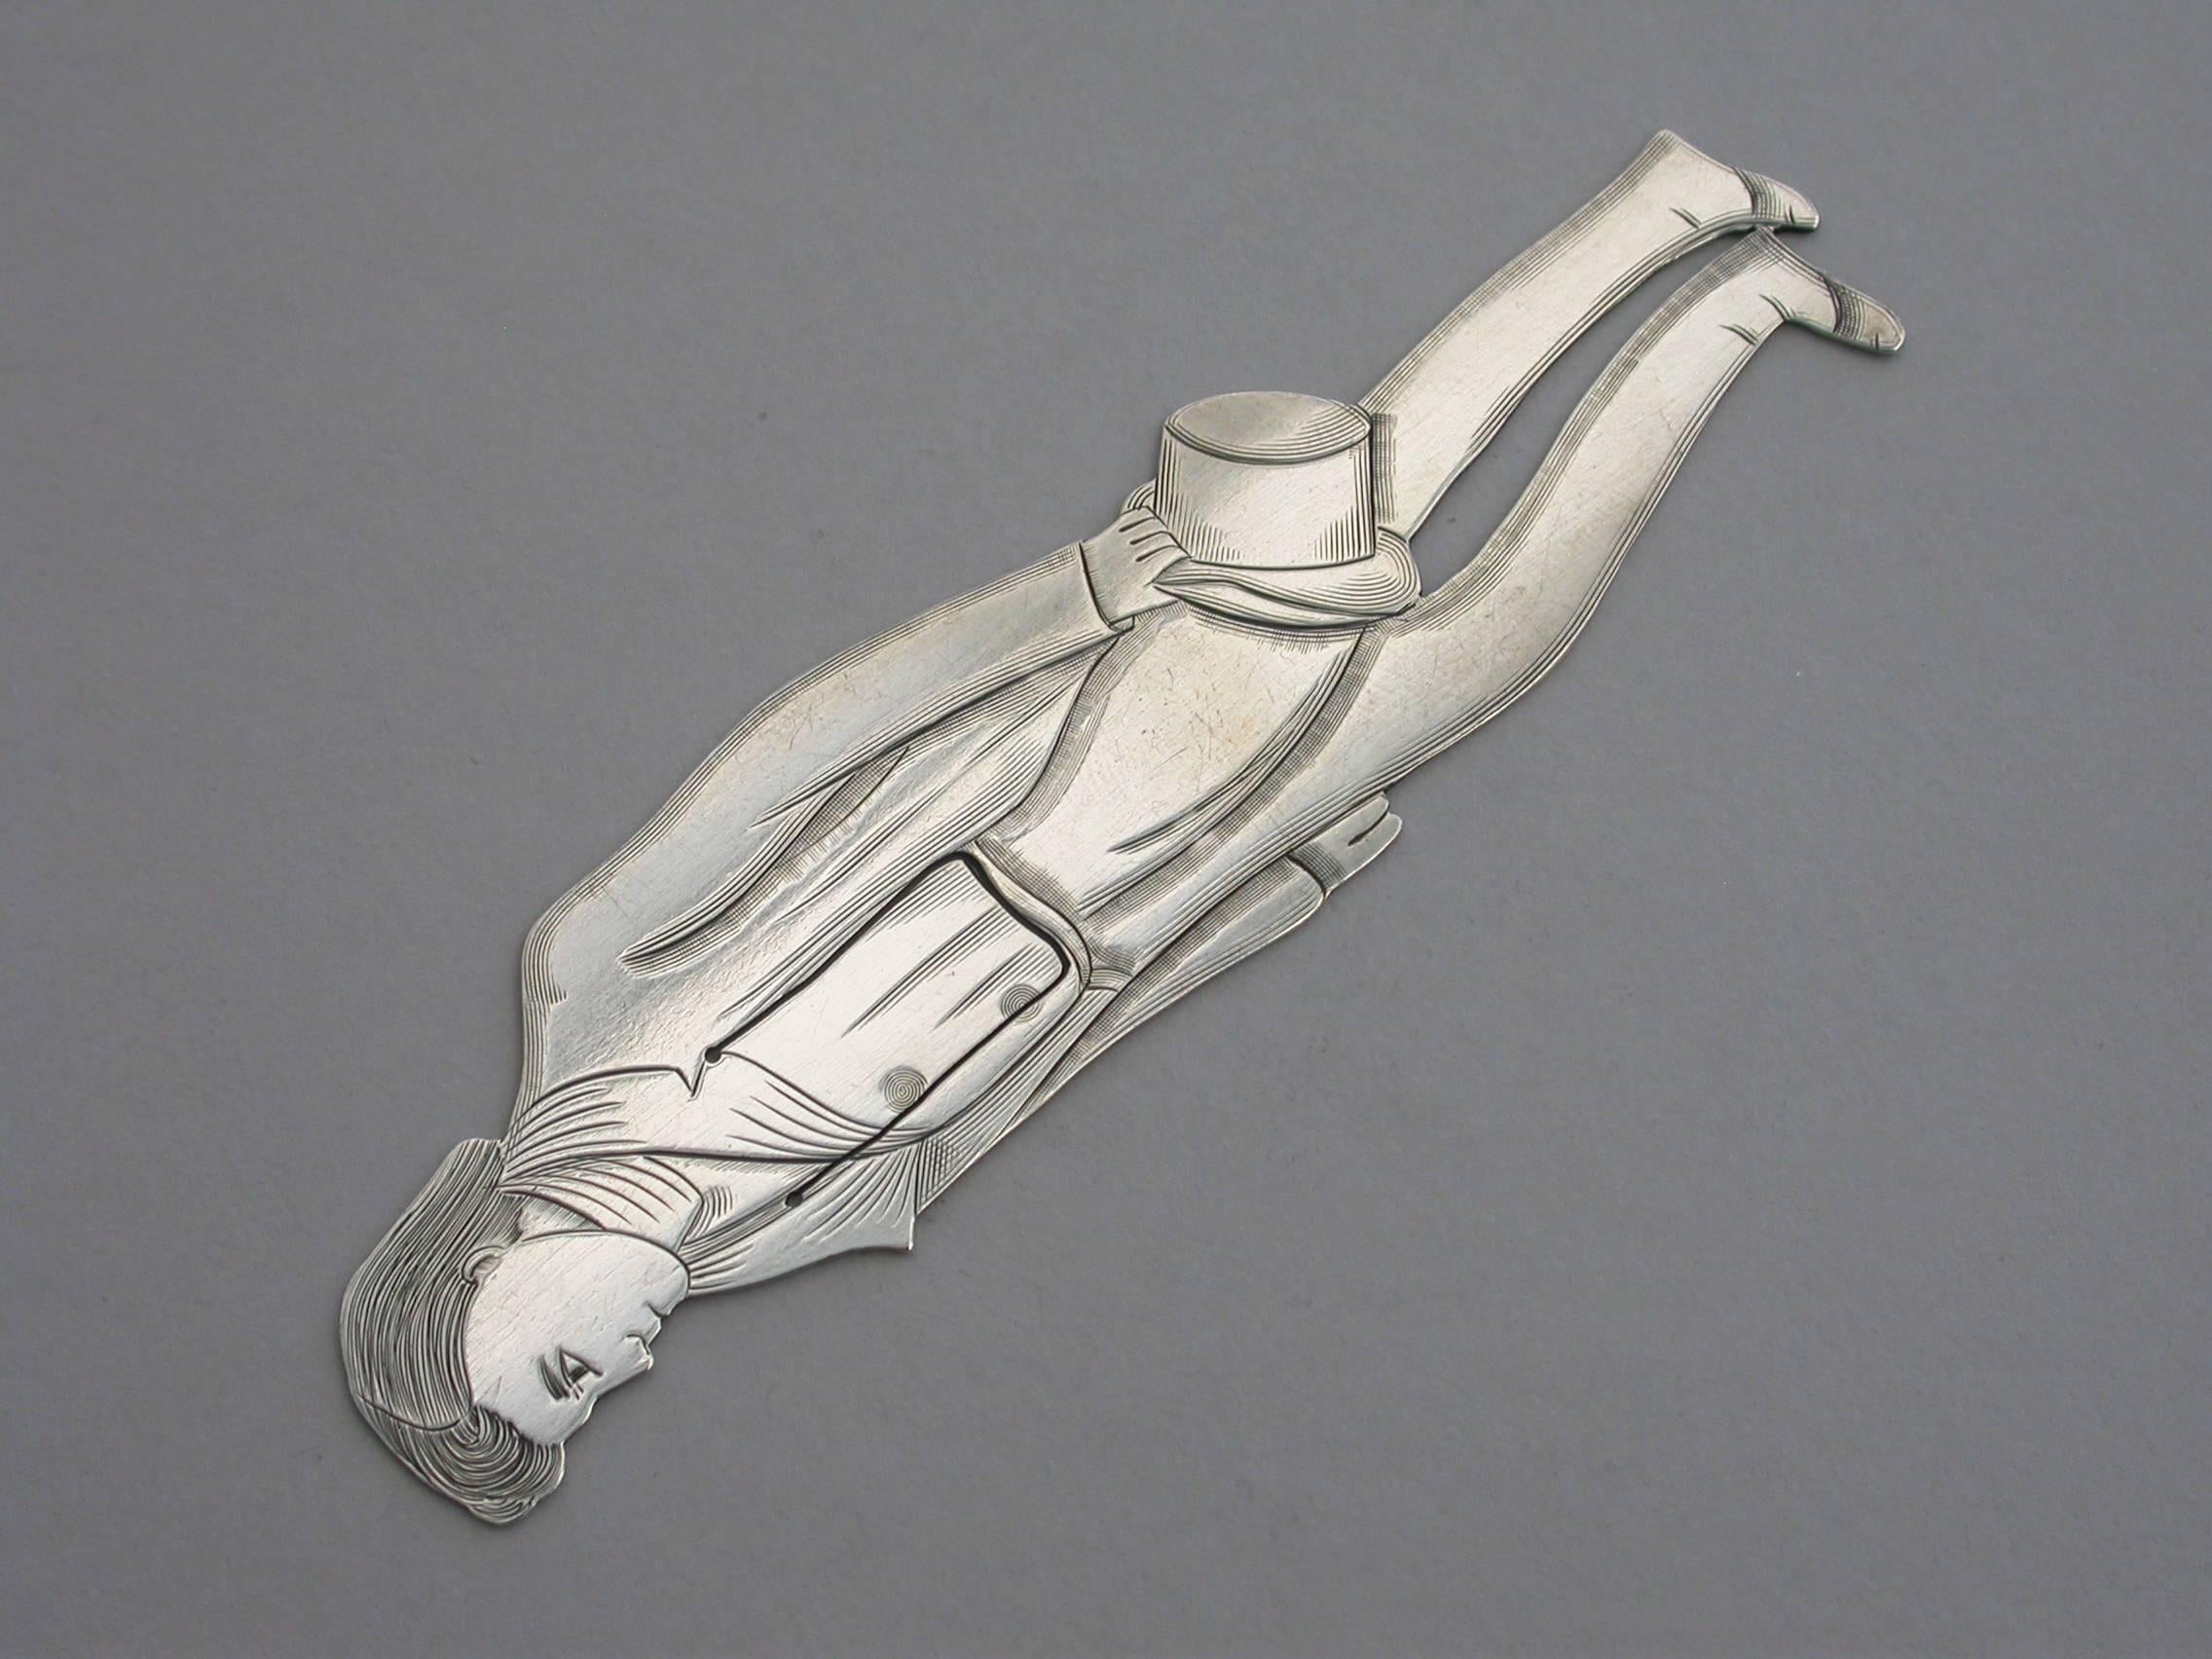 Unknown Edwardian Novelty Silver Figural Bookmark Charles Dickens 'Nicholas Nickleby' For Sale